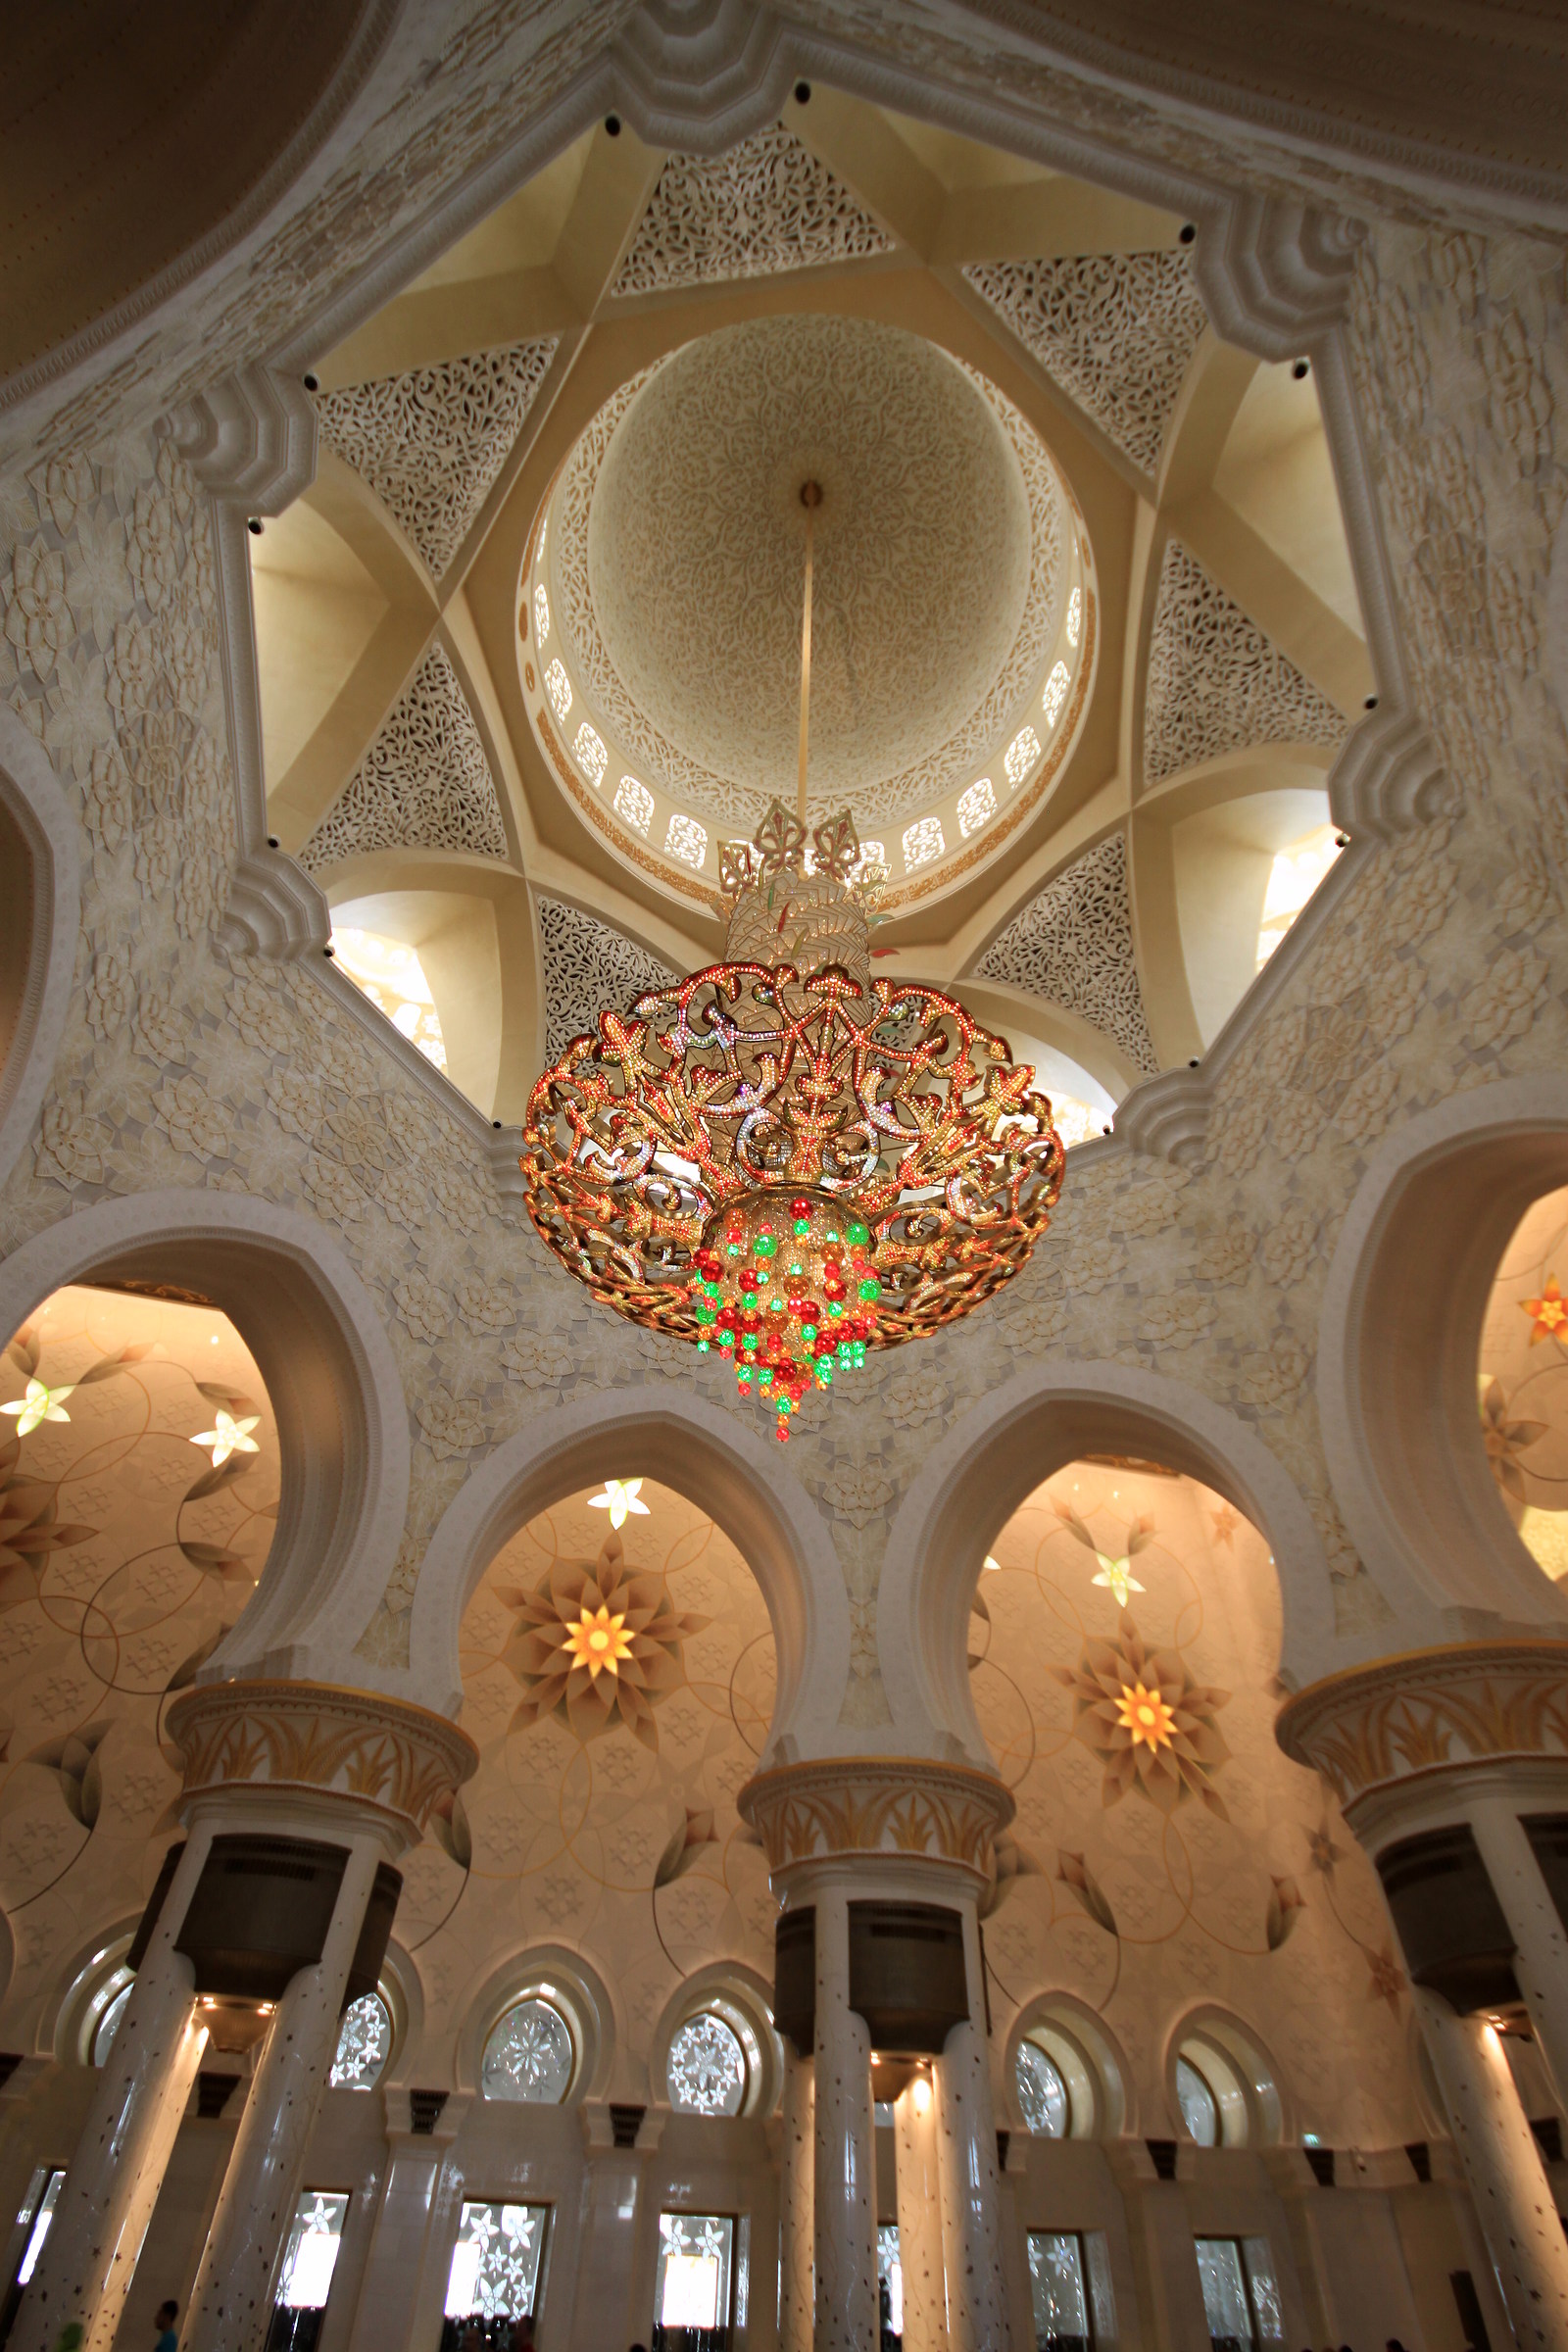 Inside the Grand Mosque in Abu Dhabi...